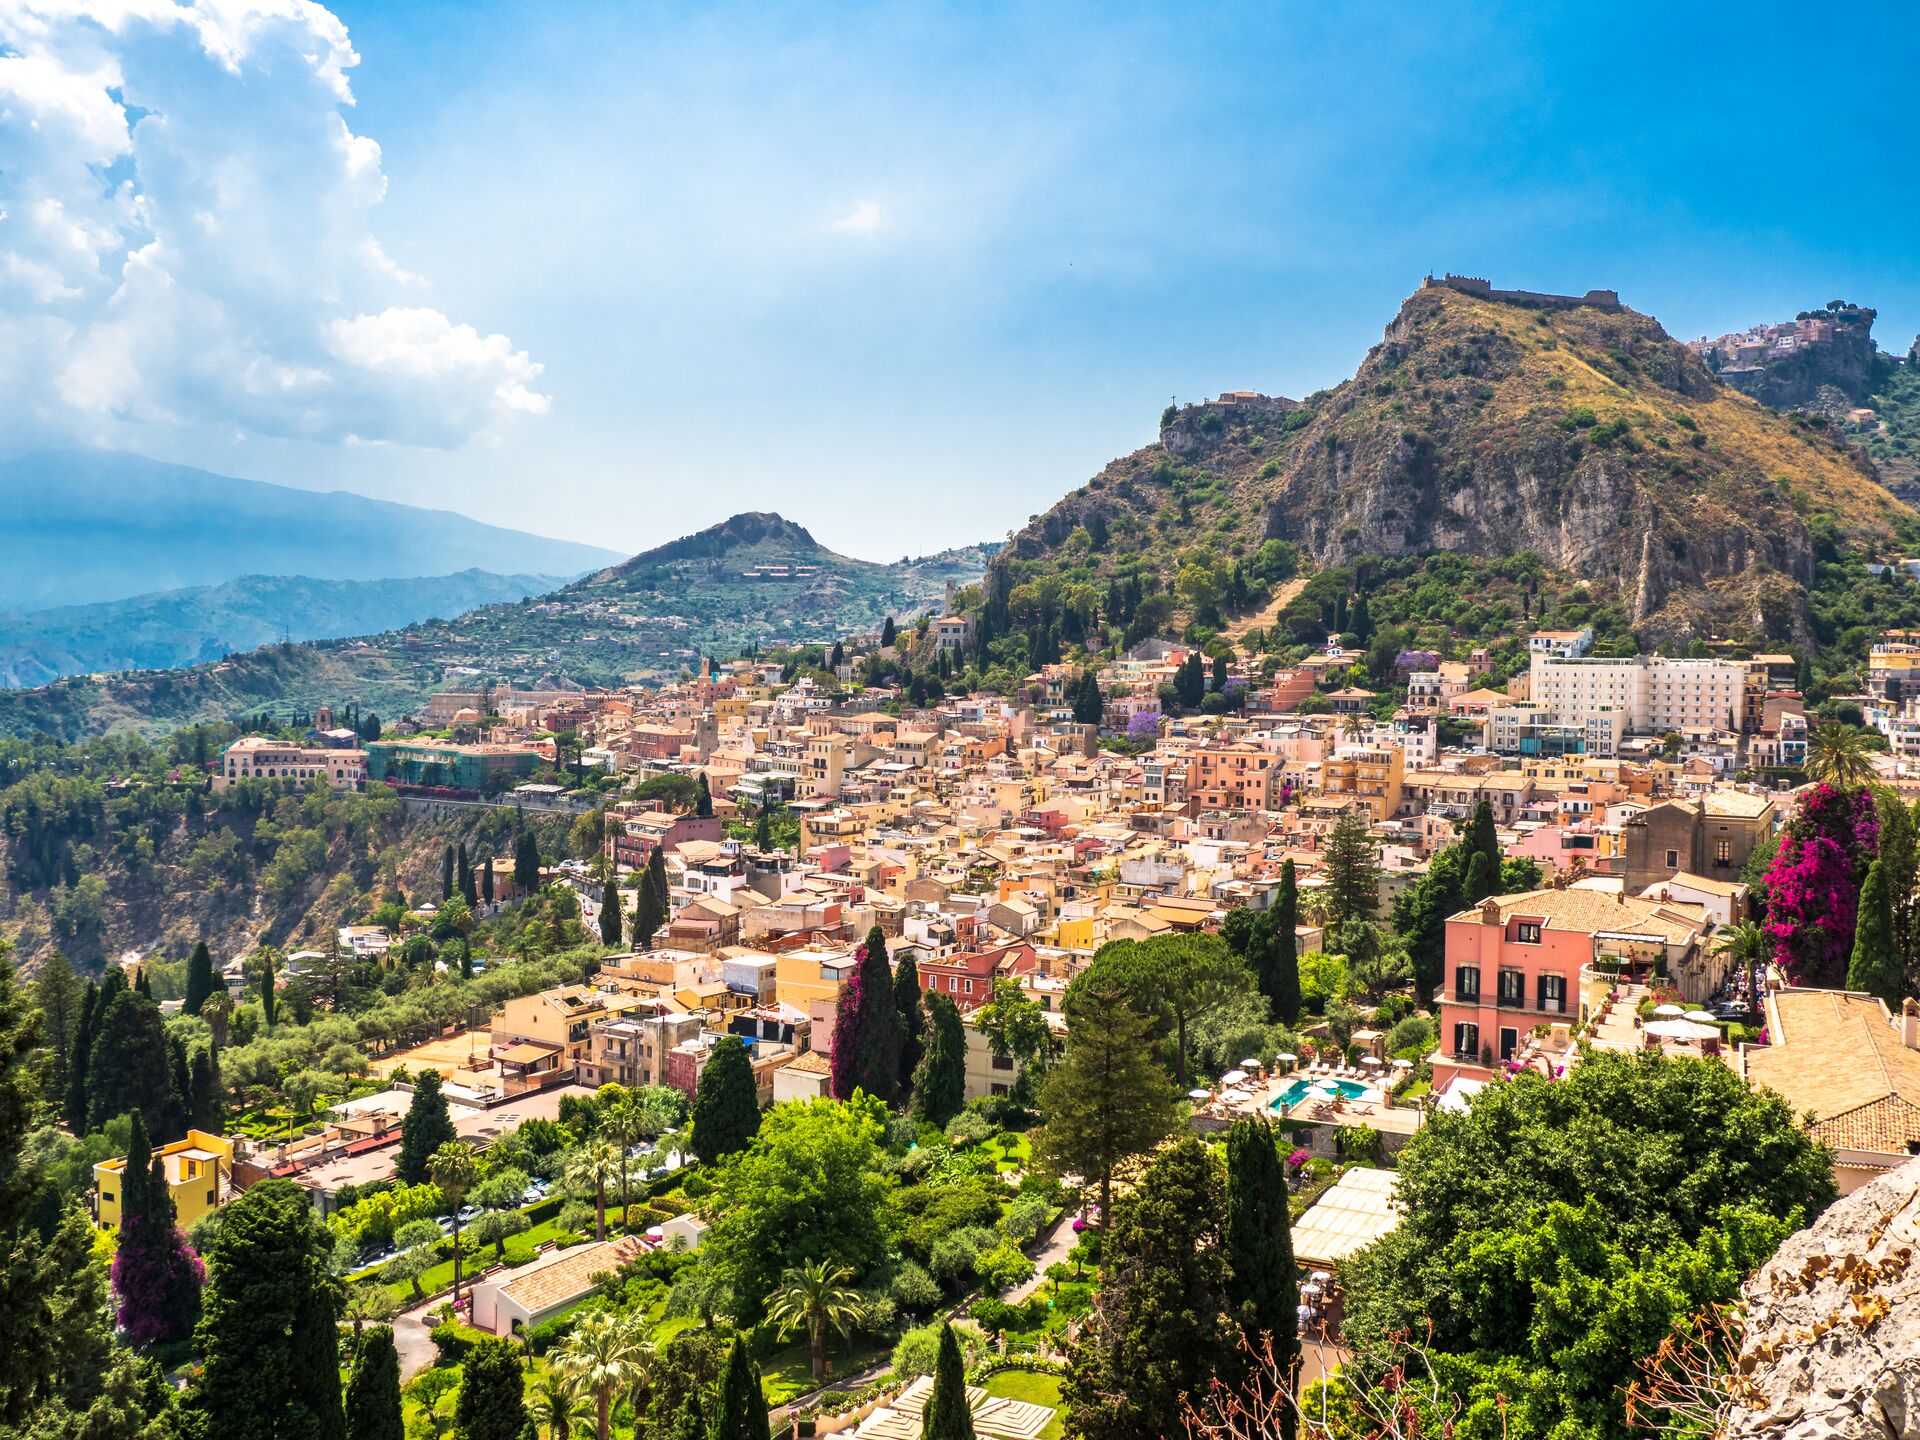 The town of Taormina, integral to Sicily’ history, sits at the foot of a green mountain with the bright blue sky behind.